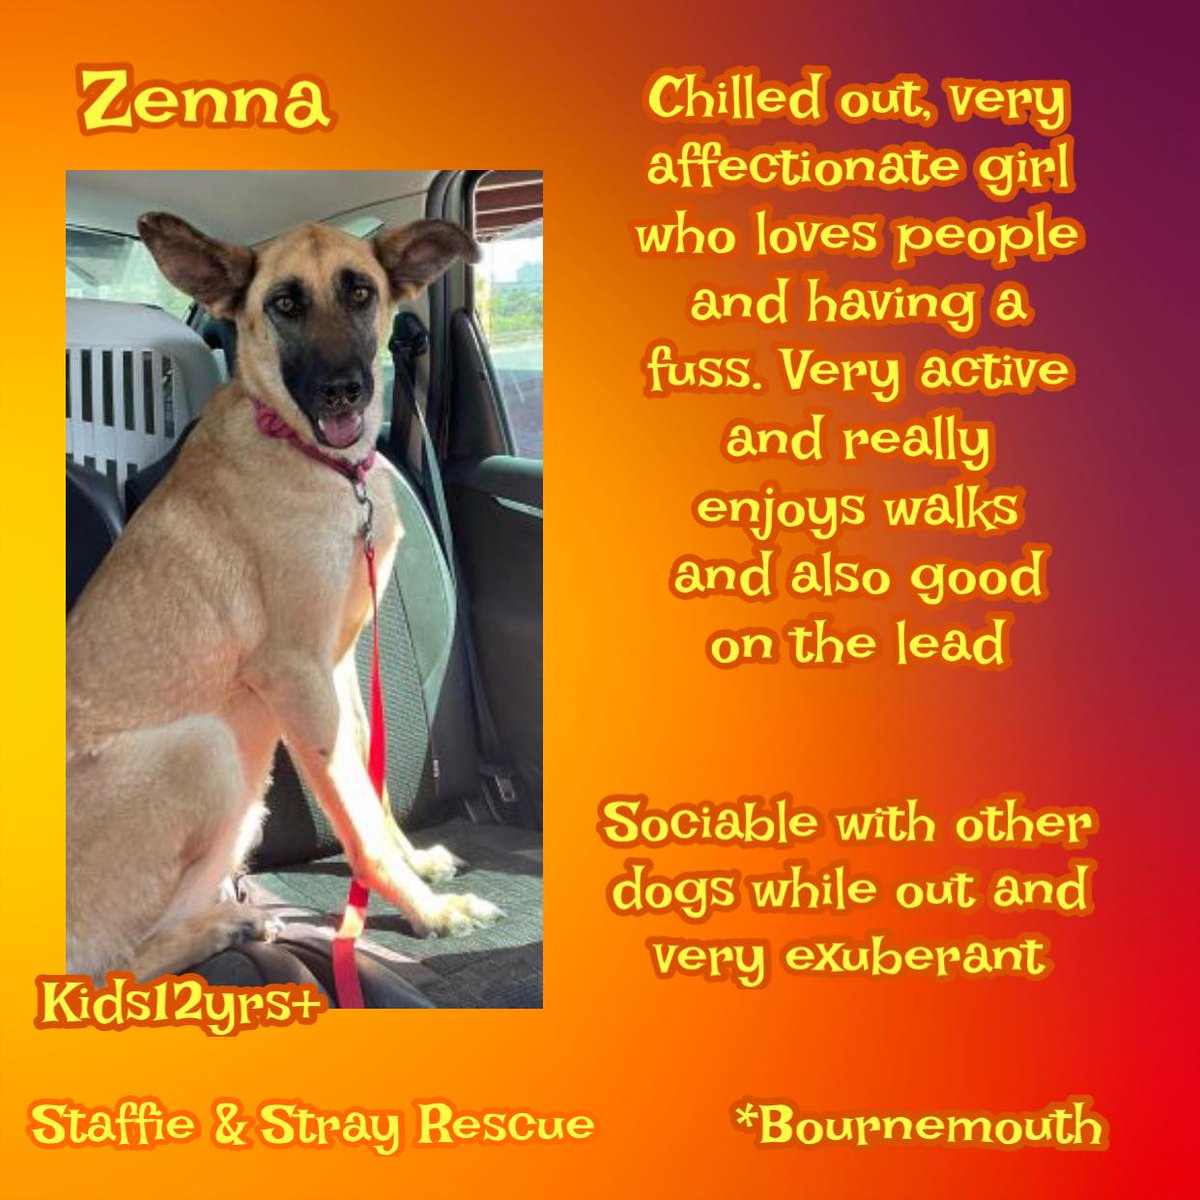 #k9hour 2/3yo large lady ZENNA has been a well loved dog, but due to unforeseen circumstances she is looking for a new home. She is a very affectionate girl who loves people & having fusses. She is very active, loves her walks & is good on lead. She is sociable with other dogs…